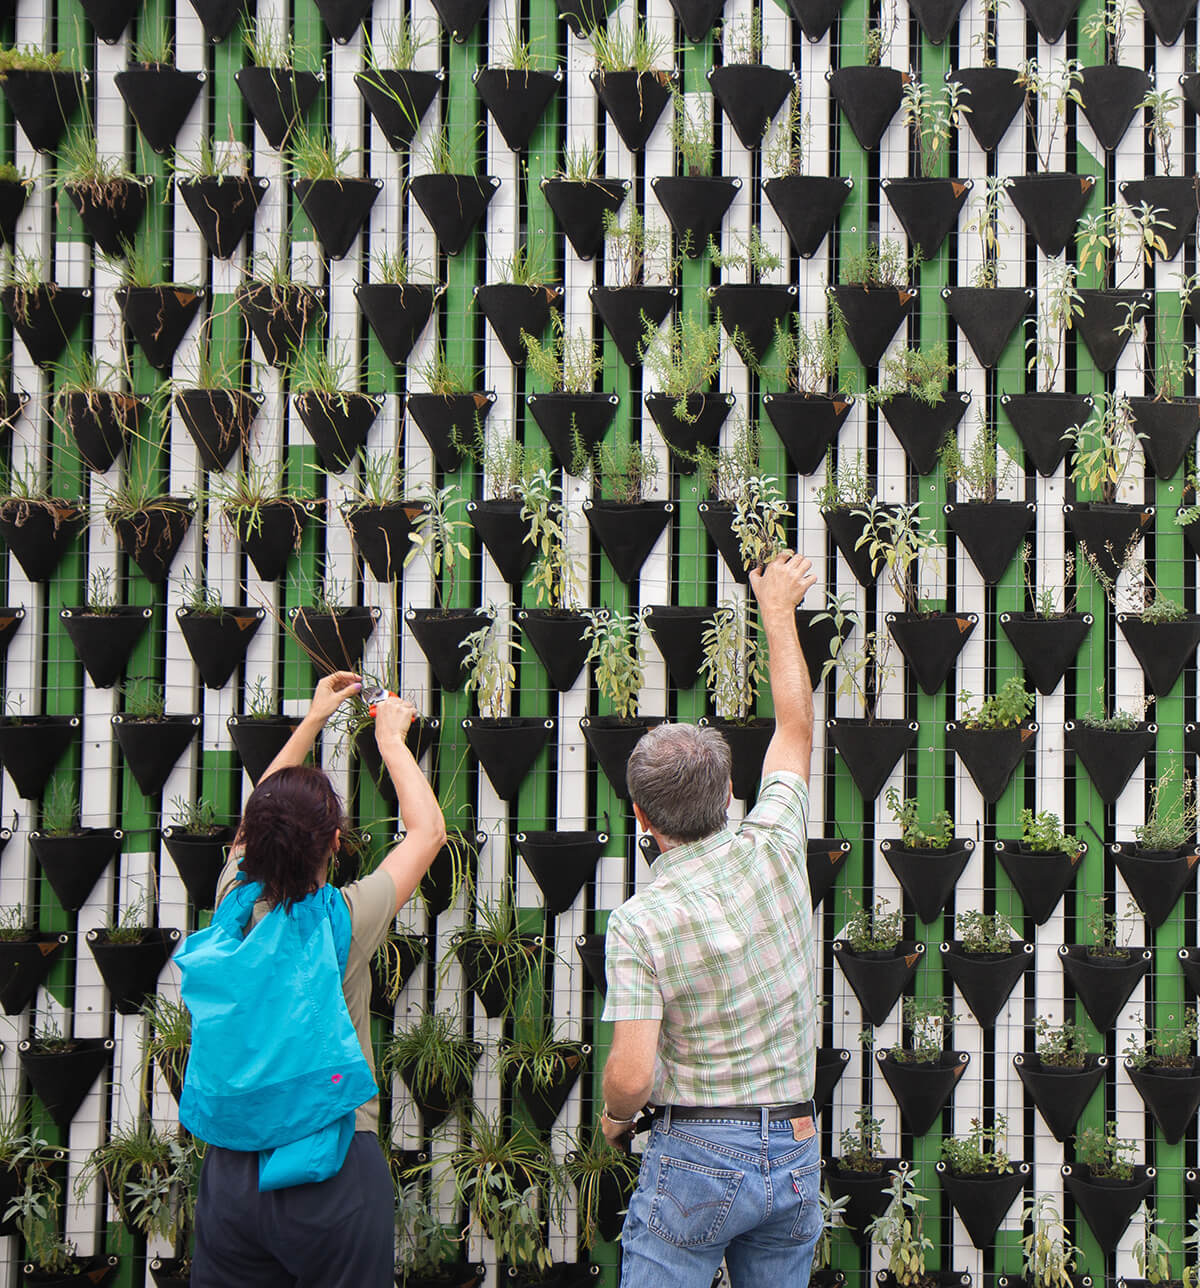 Designer Decorating the wall with plants.